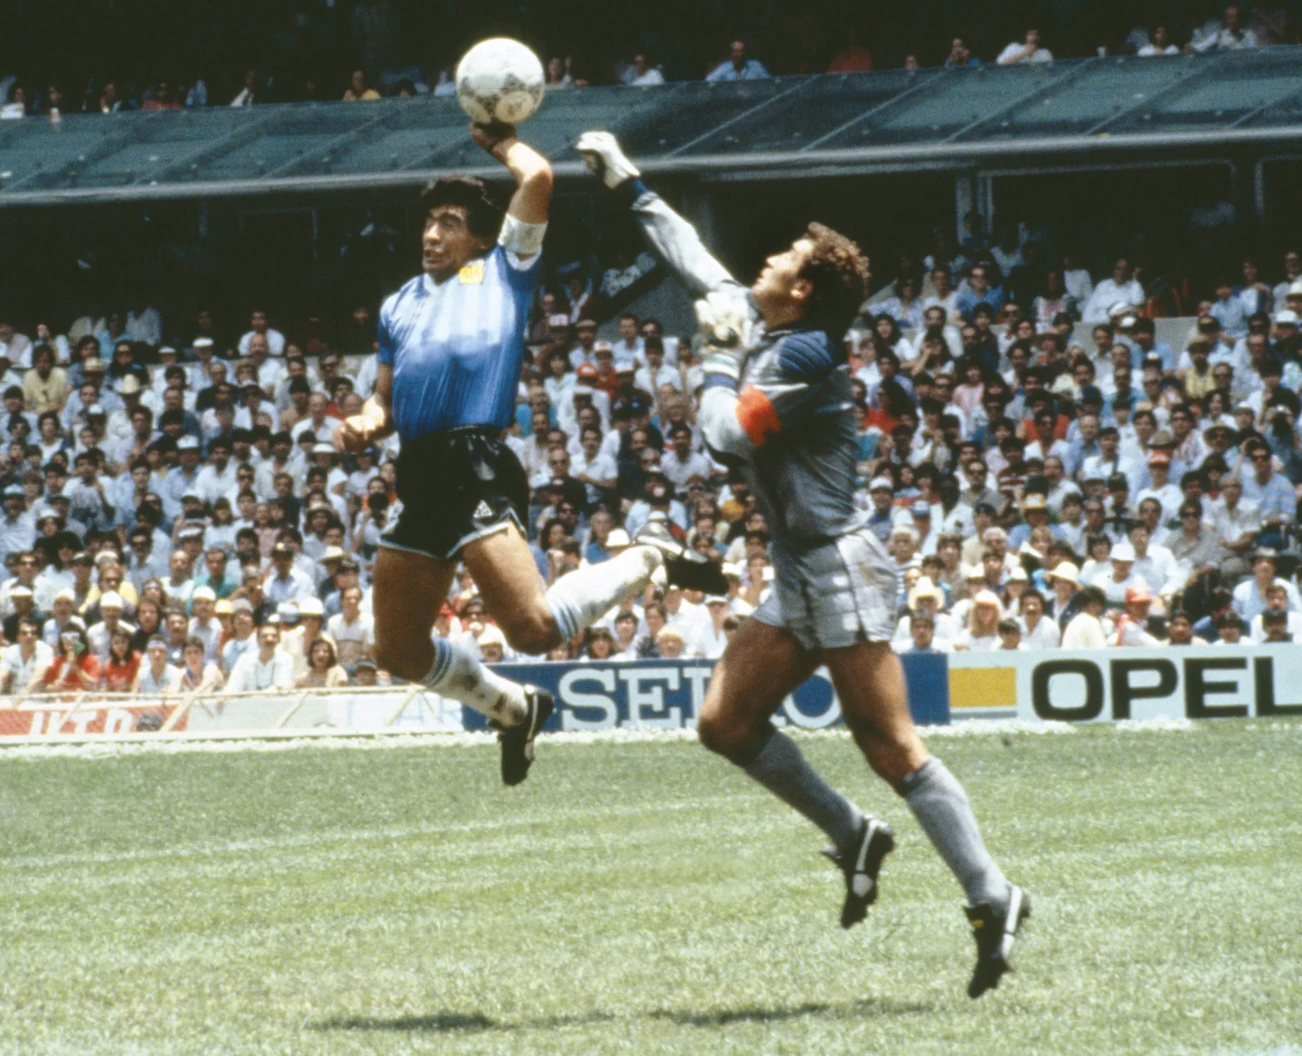 The Hand of God. A goal by Diego Maradona led Argentina to a 2-1 win over England in the quarterfinals of the 1986 World Cup, which they would go on to win. However, he illegally used his hand to score it. While this incident is more the fault of poor refereeing than cheating, it is one of the most infamous moments in soccer history. 